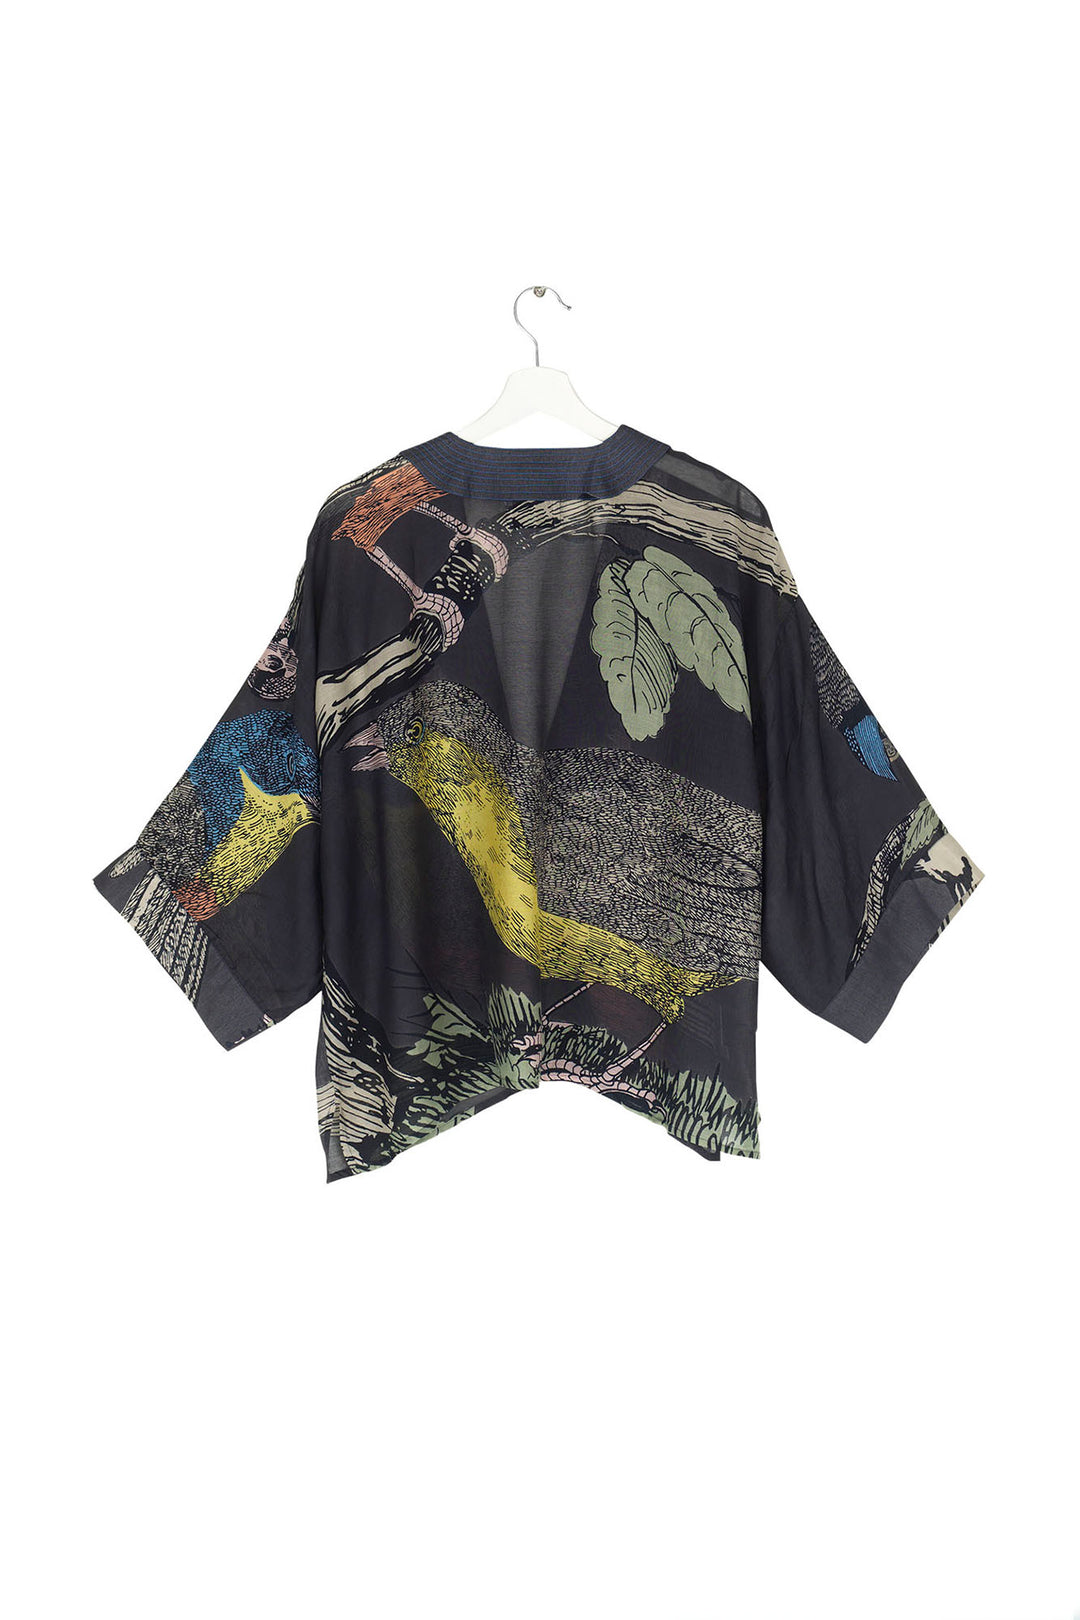 short ladies kimono with a colourful bird print on a dark navy background by One Hundred Stars